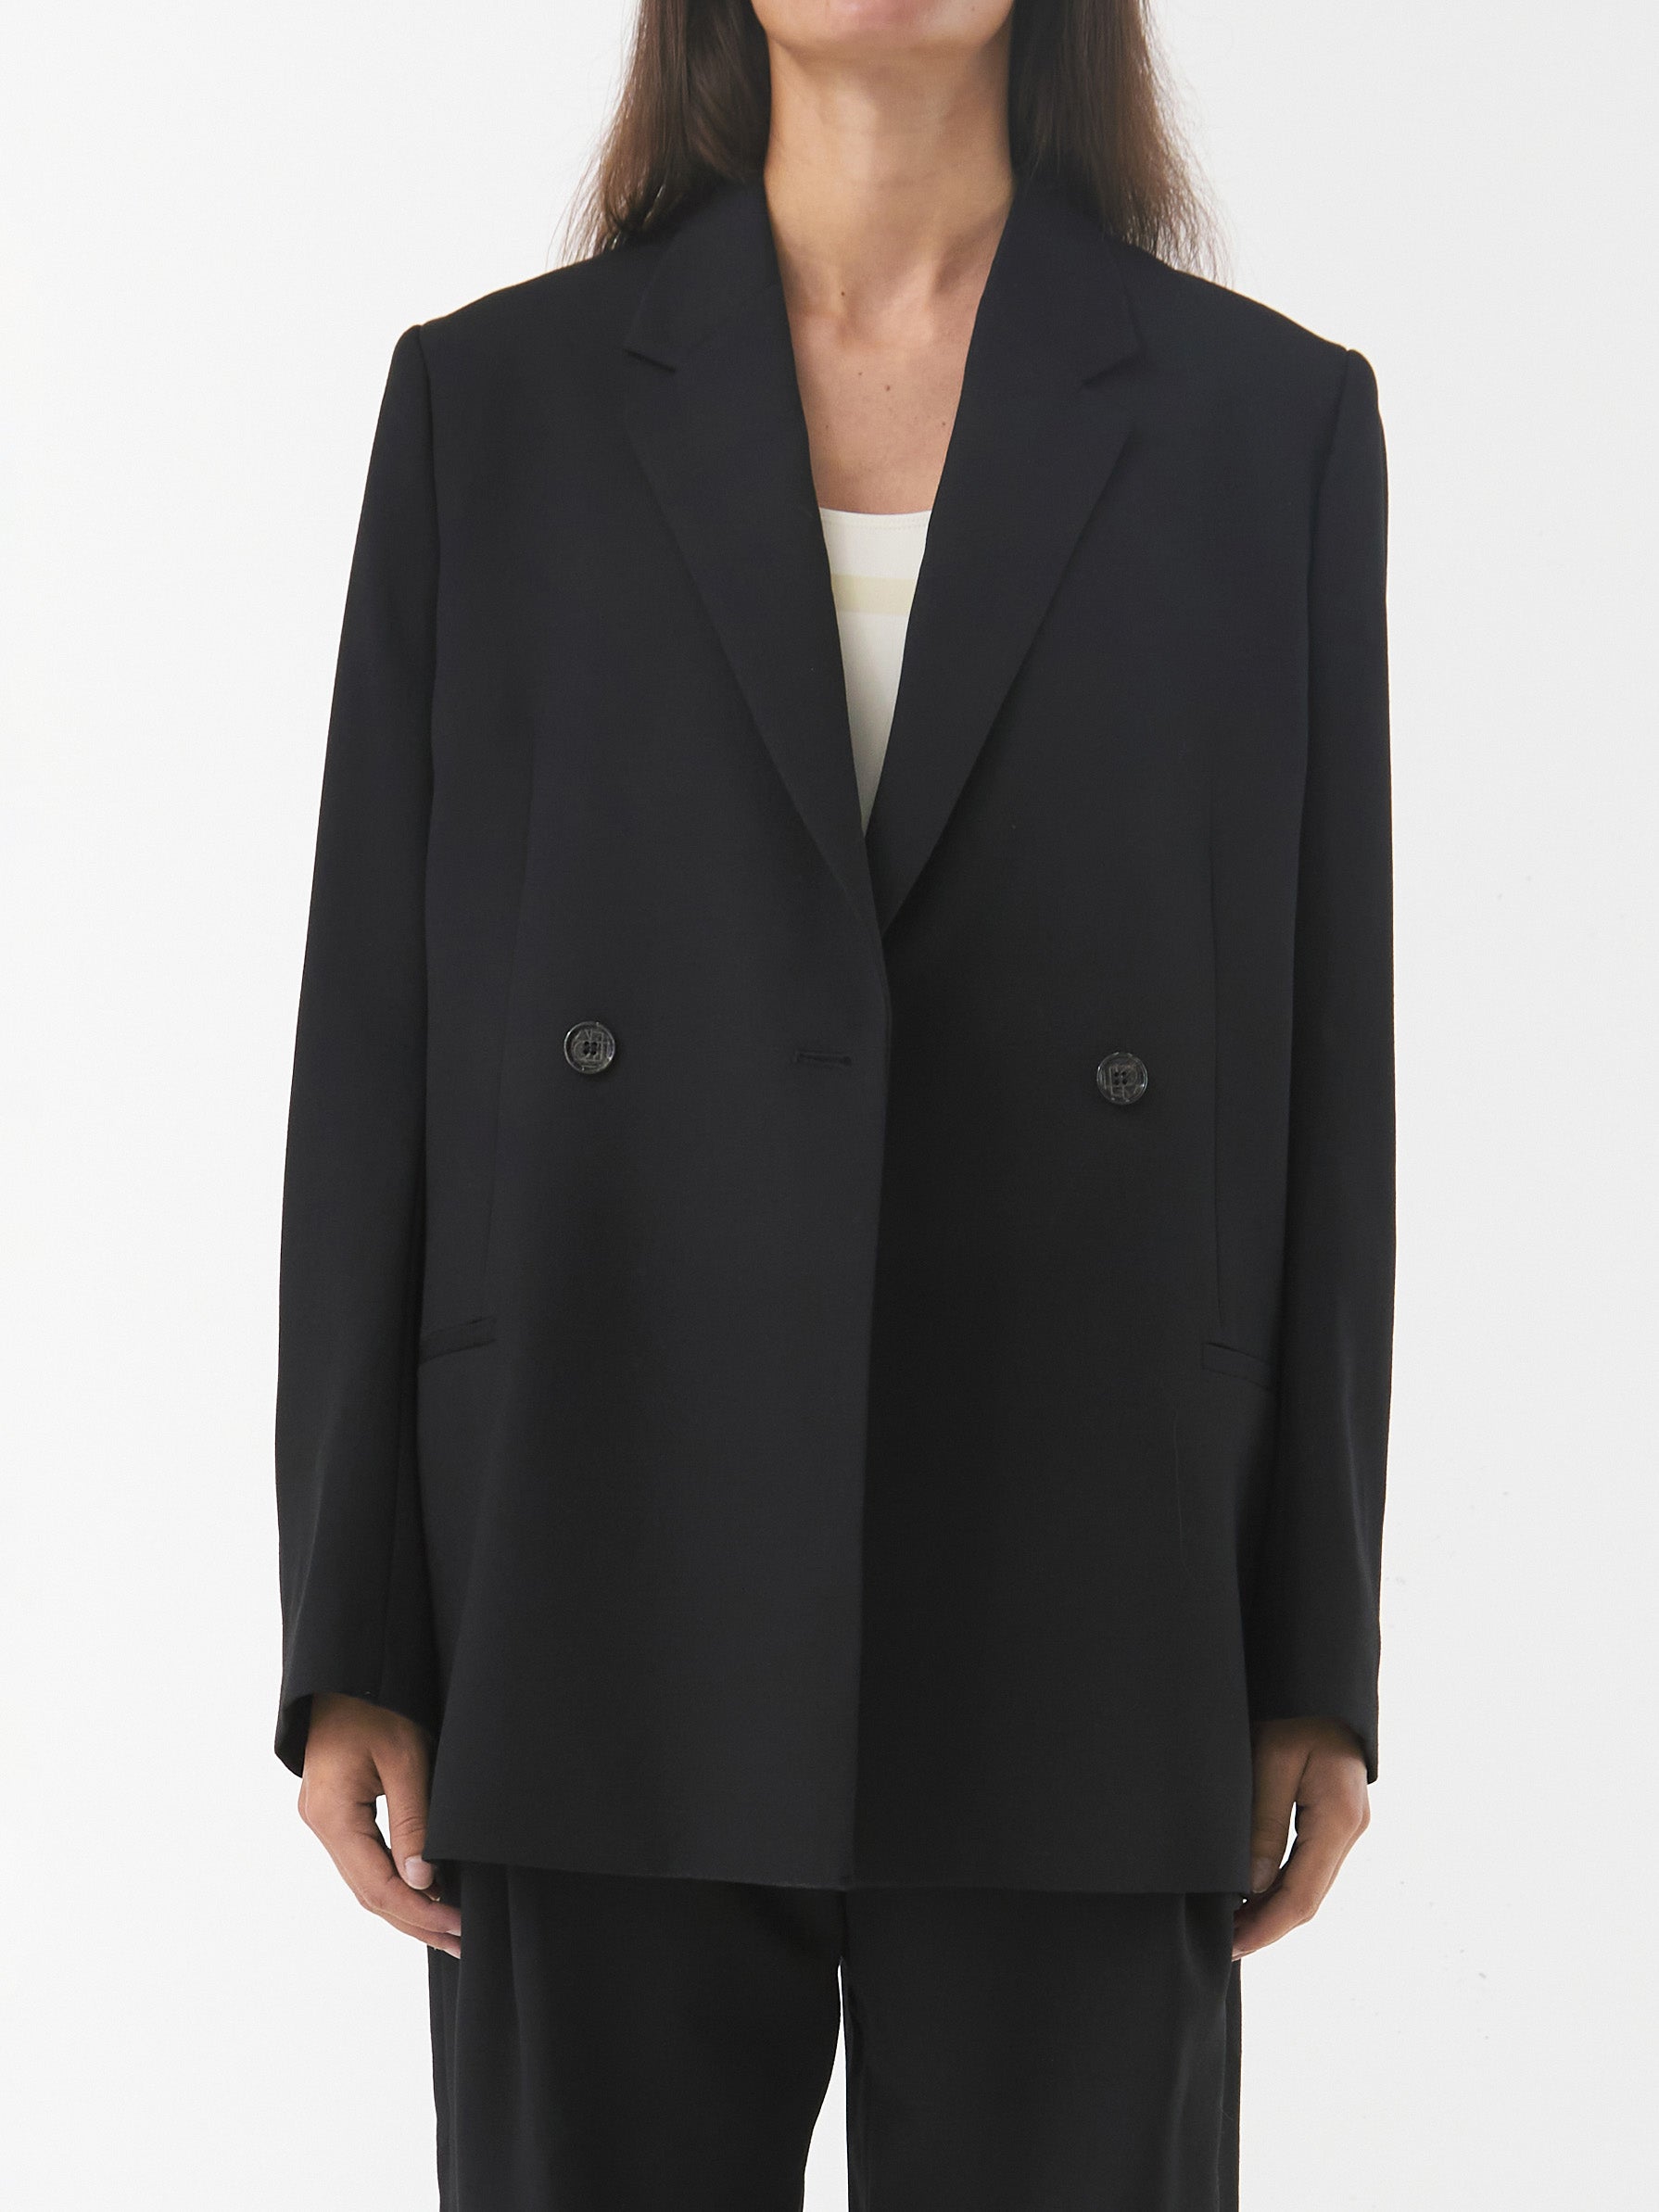 Totéme - Double Breasted Vent Blazer in Black